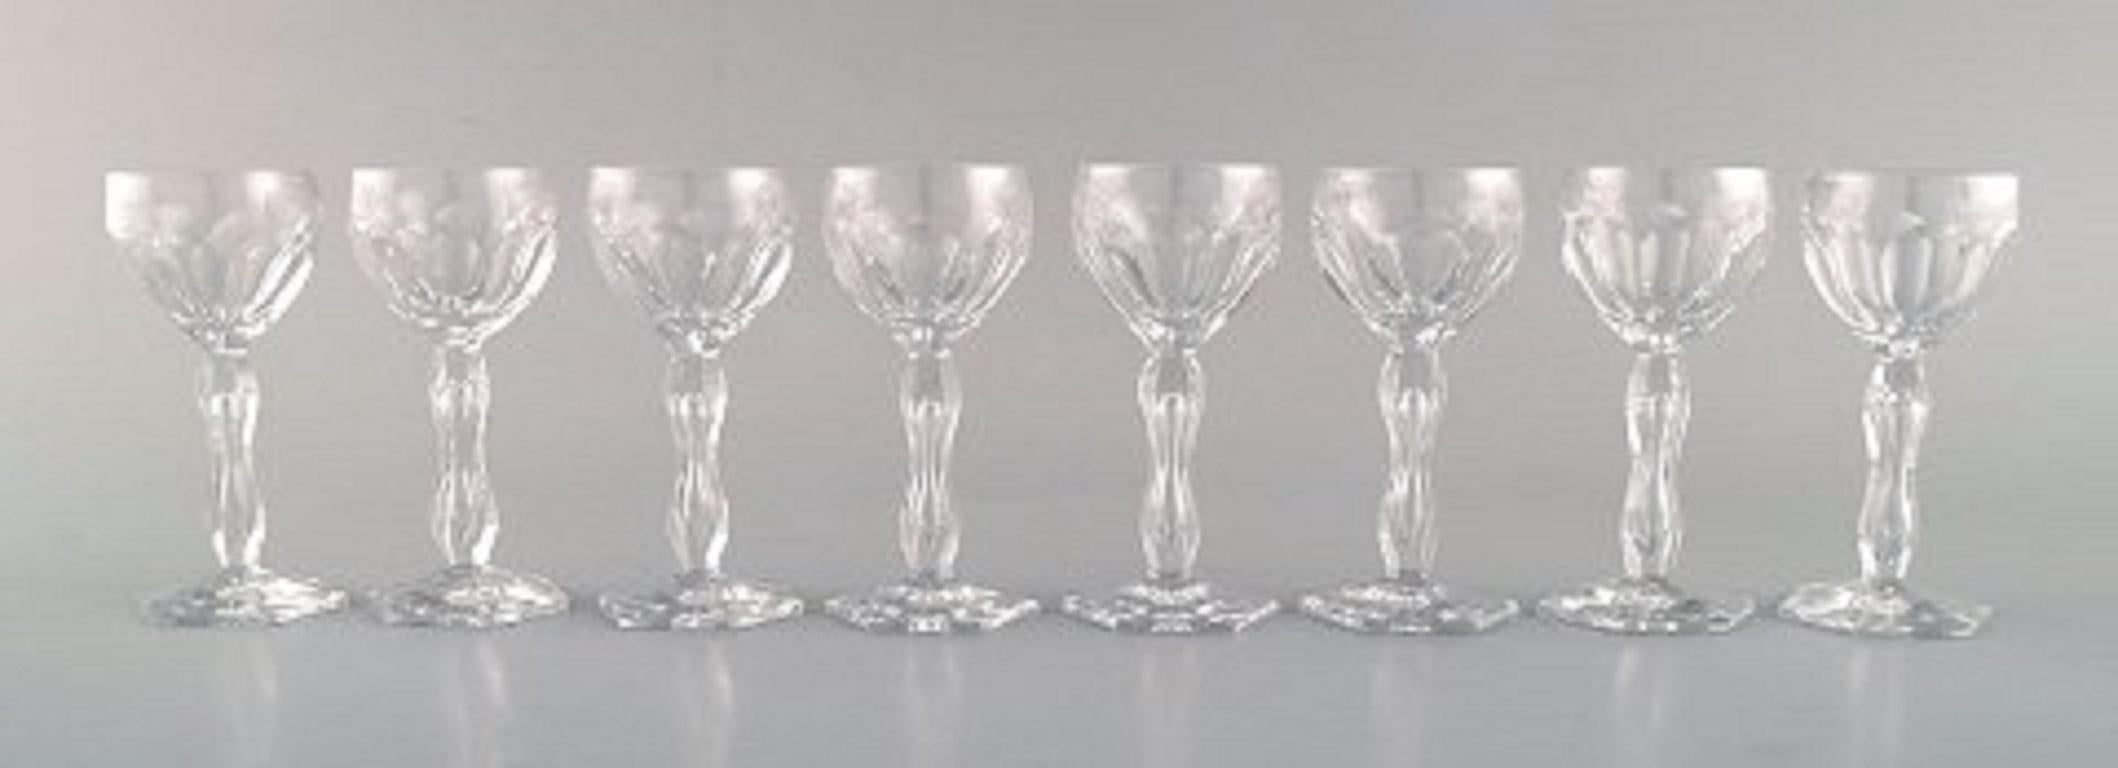 Val St. Lambert, Belgium. Eight Lalaing glasses in mouth-blown crystal glass, 1950s-1960s.
Measures: 10 x 4.5 cm.
In very good condition.